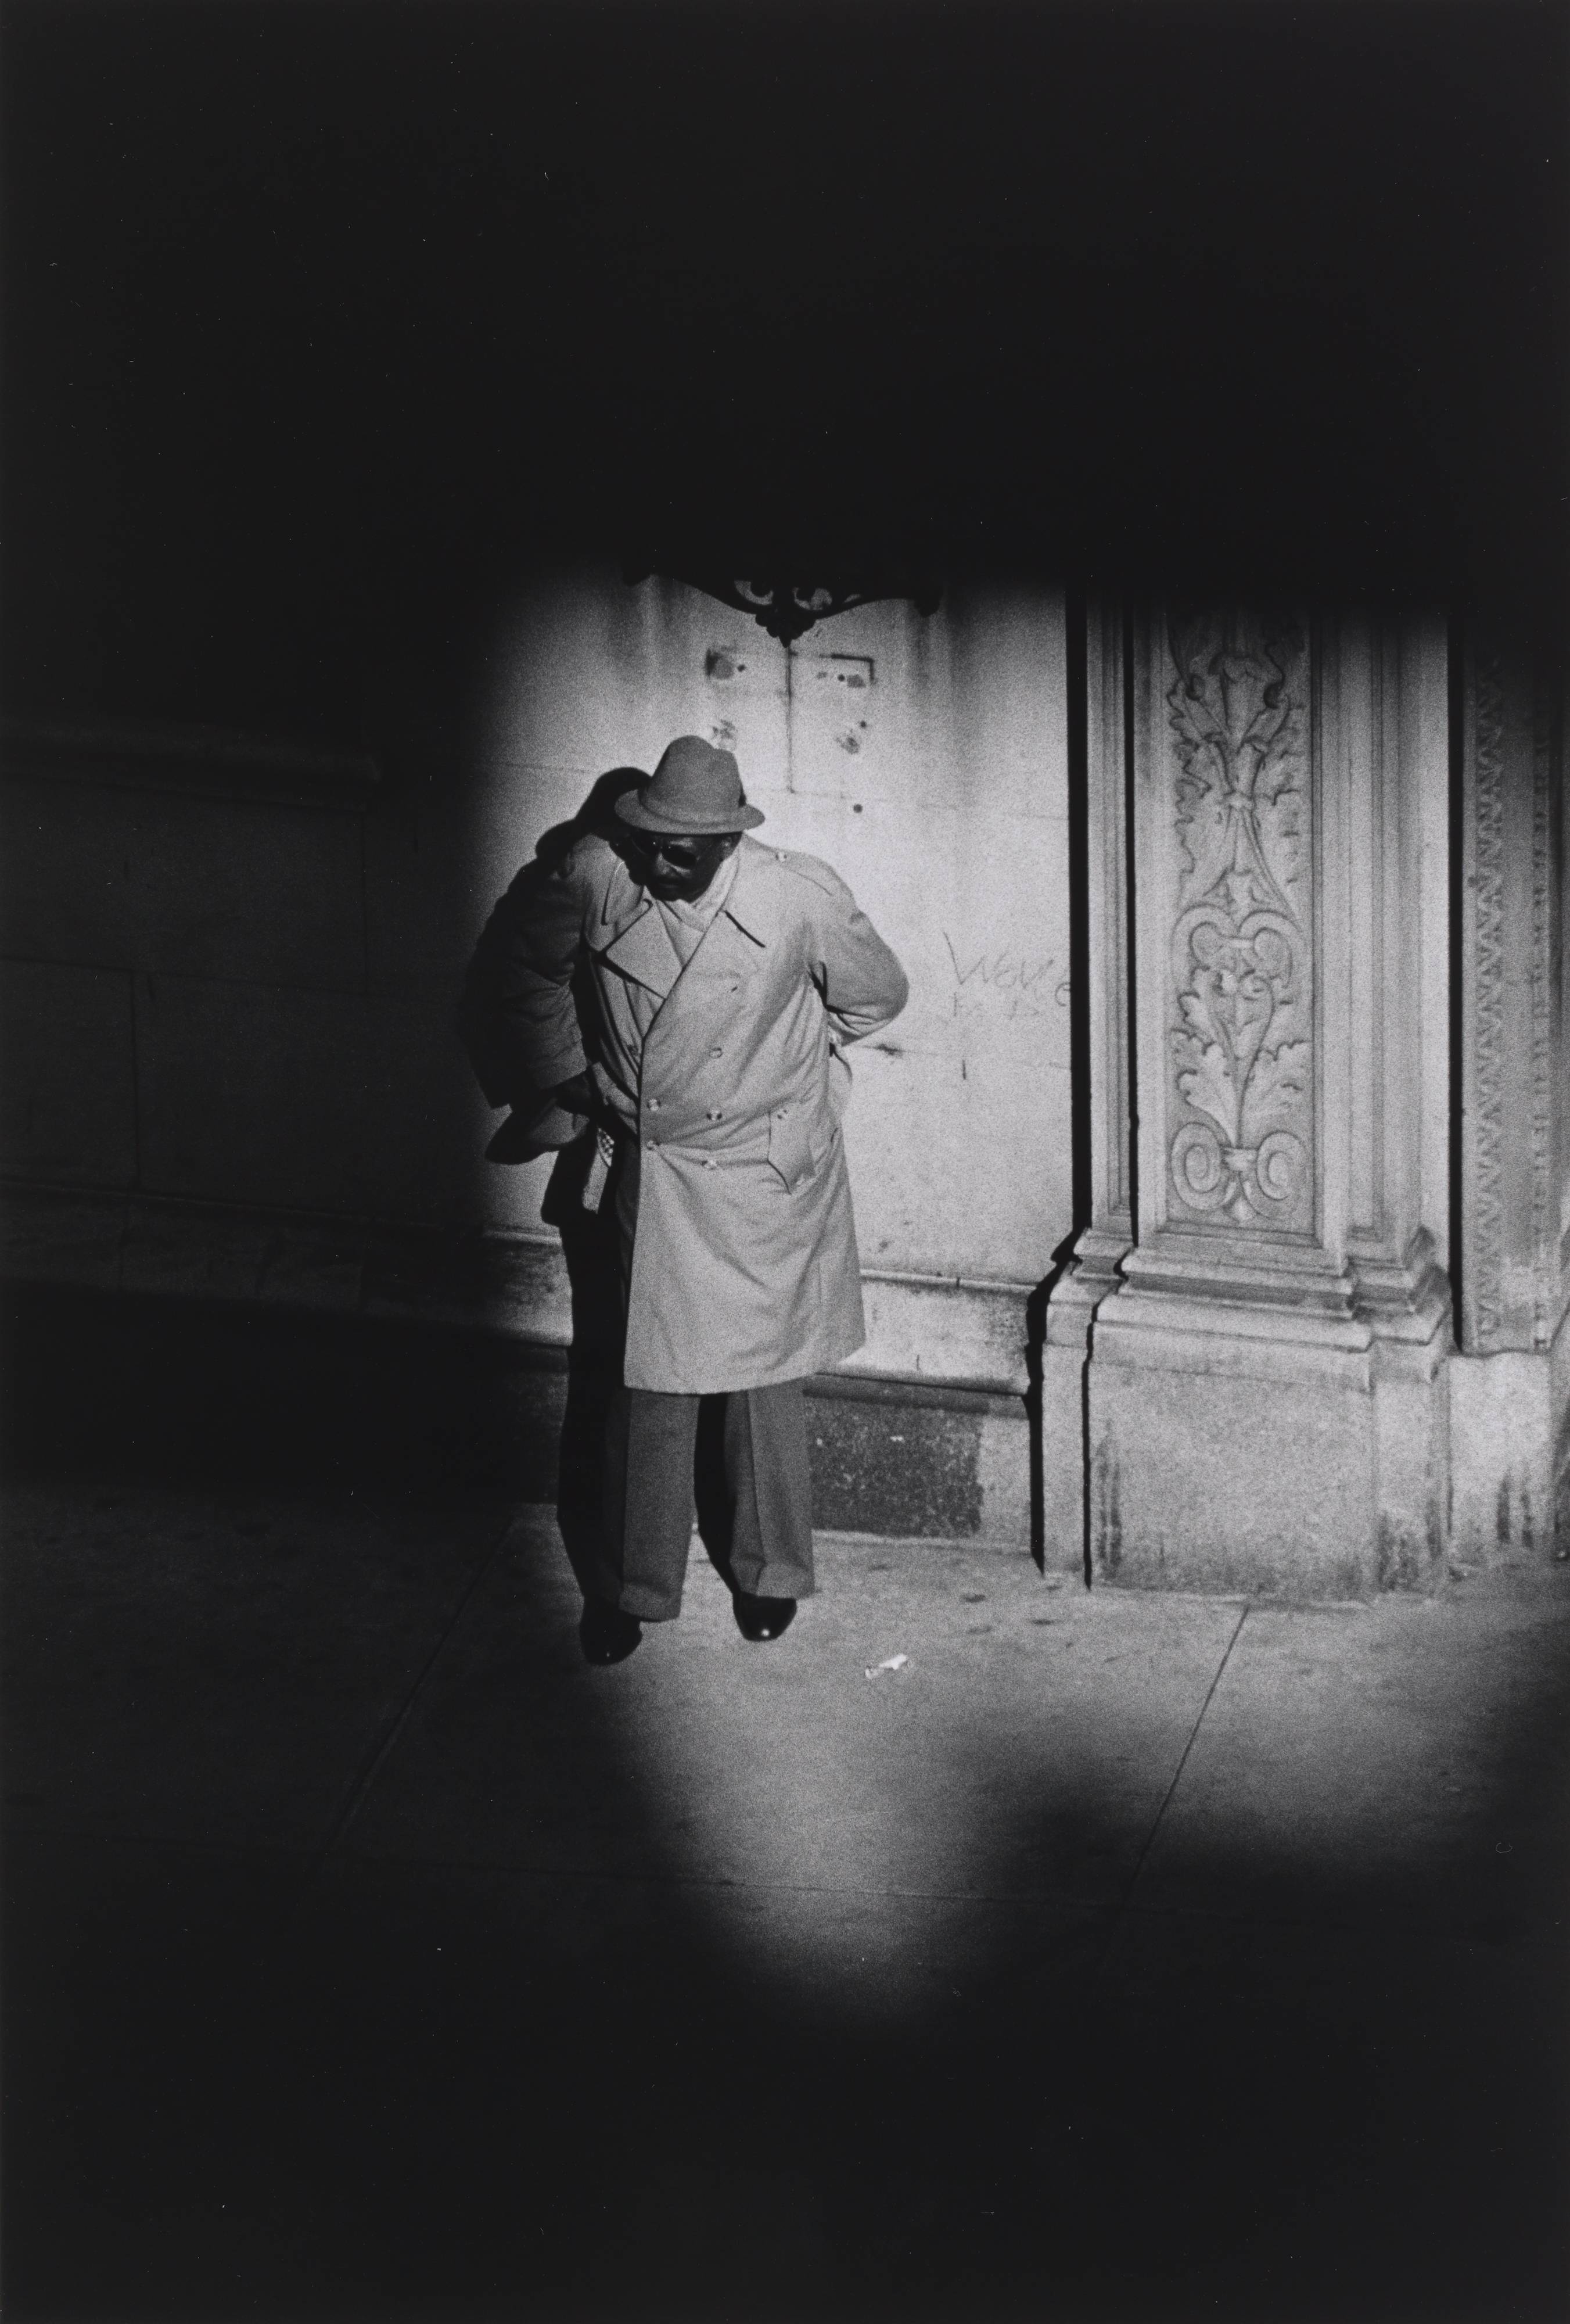 Louis Stettner, Man Out of the Shadow, New York, 1980-1981 · SFMOMA